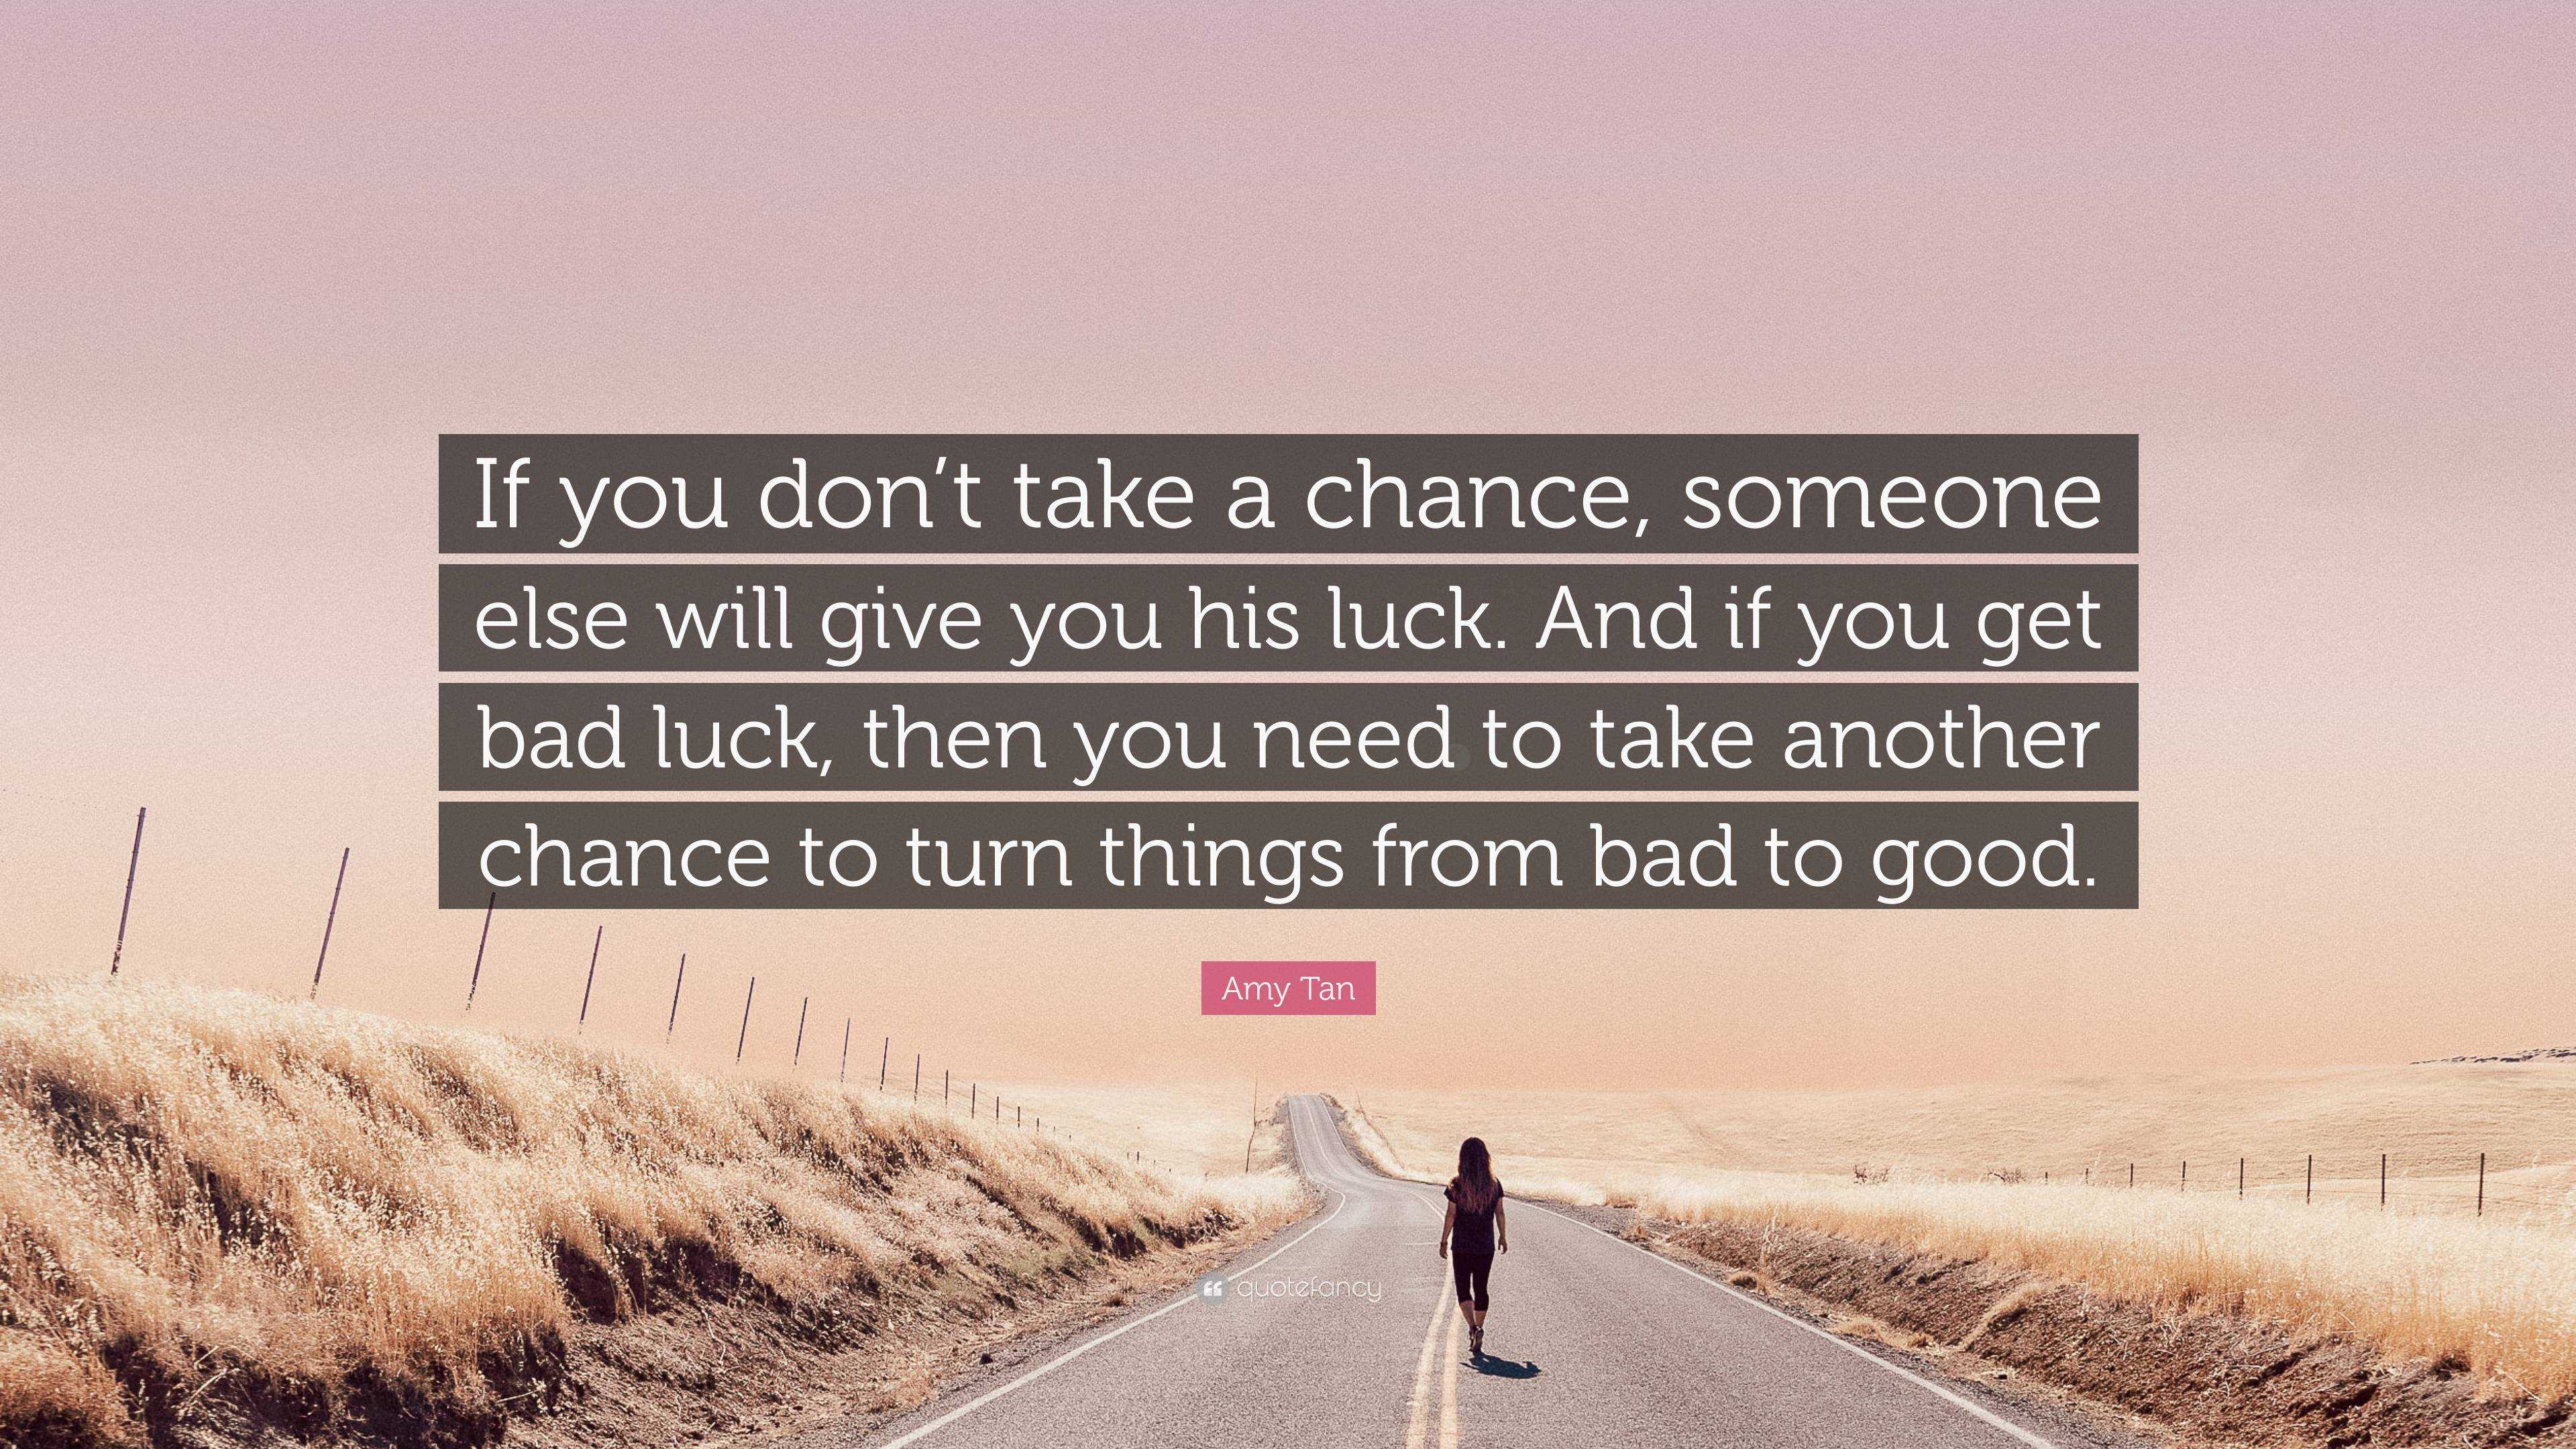 Amy Tan Quote: “If you don't take a chance, someone else will give you his  luck. And if you get bad luck, then you need to take another ”